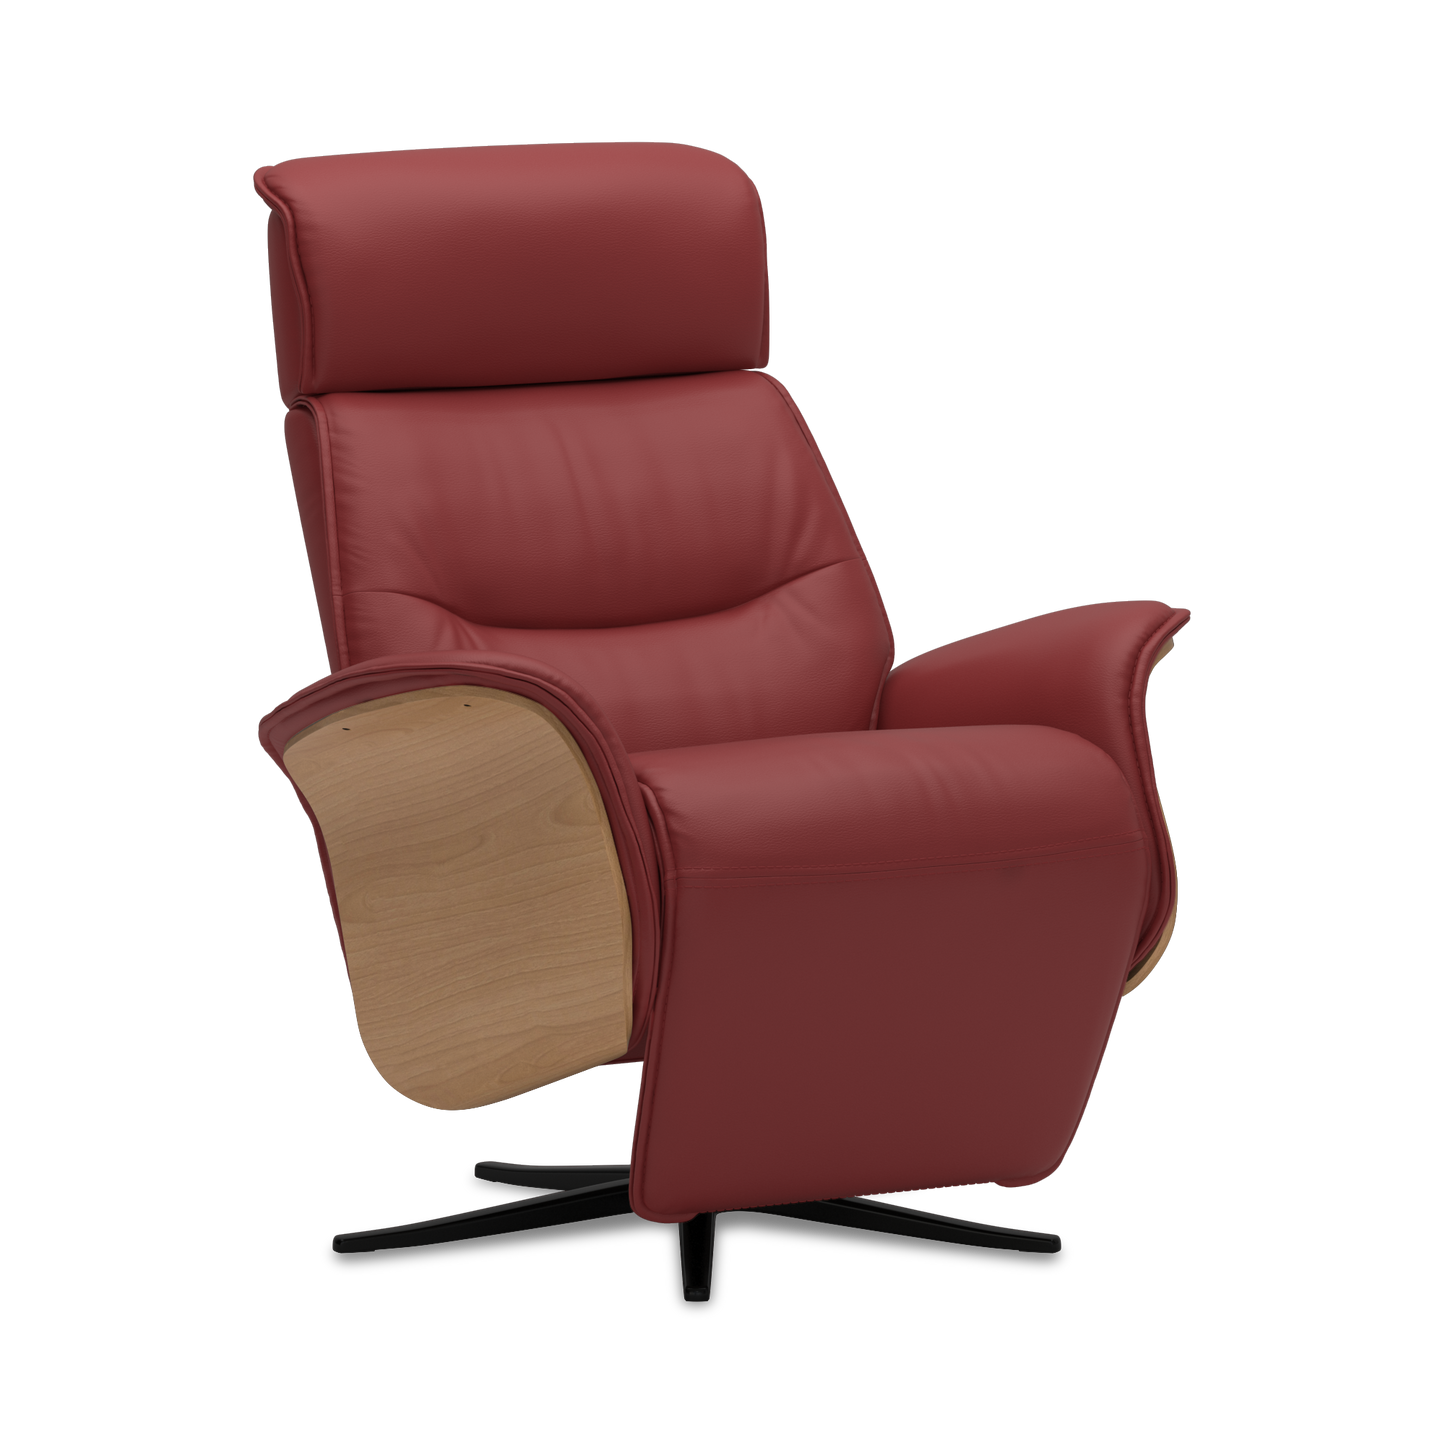 Space 5300 Integrated Manual Recliner Sale by IMG Comfort Norway Stockist Make Your House A Home, Furniture Store Bendigo. Australia Wide Delivery.